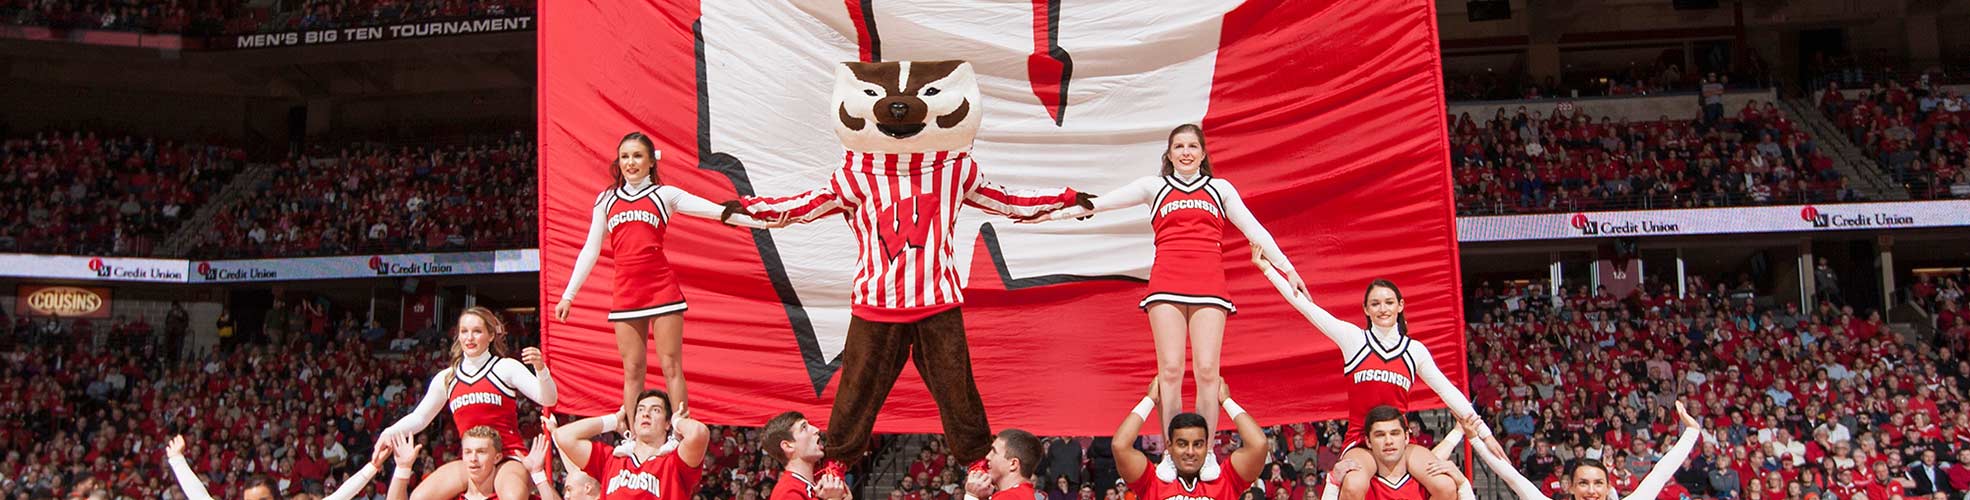 A Photo of UW-Madison's Bucky Badger and the UW Spirit Squad at a Men's Basketball Game Forming a Pyramid'